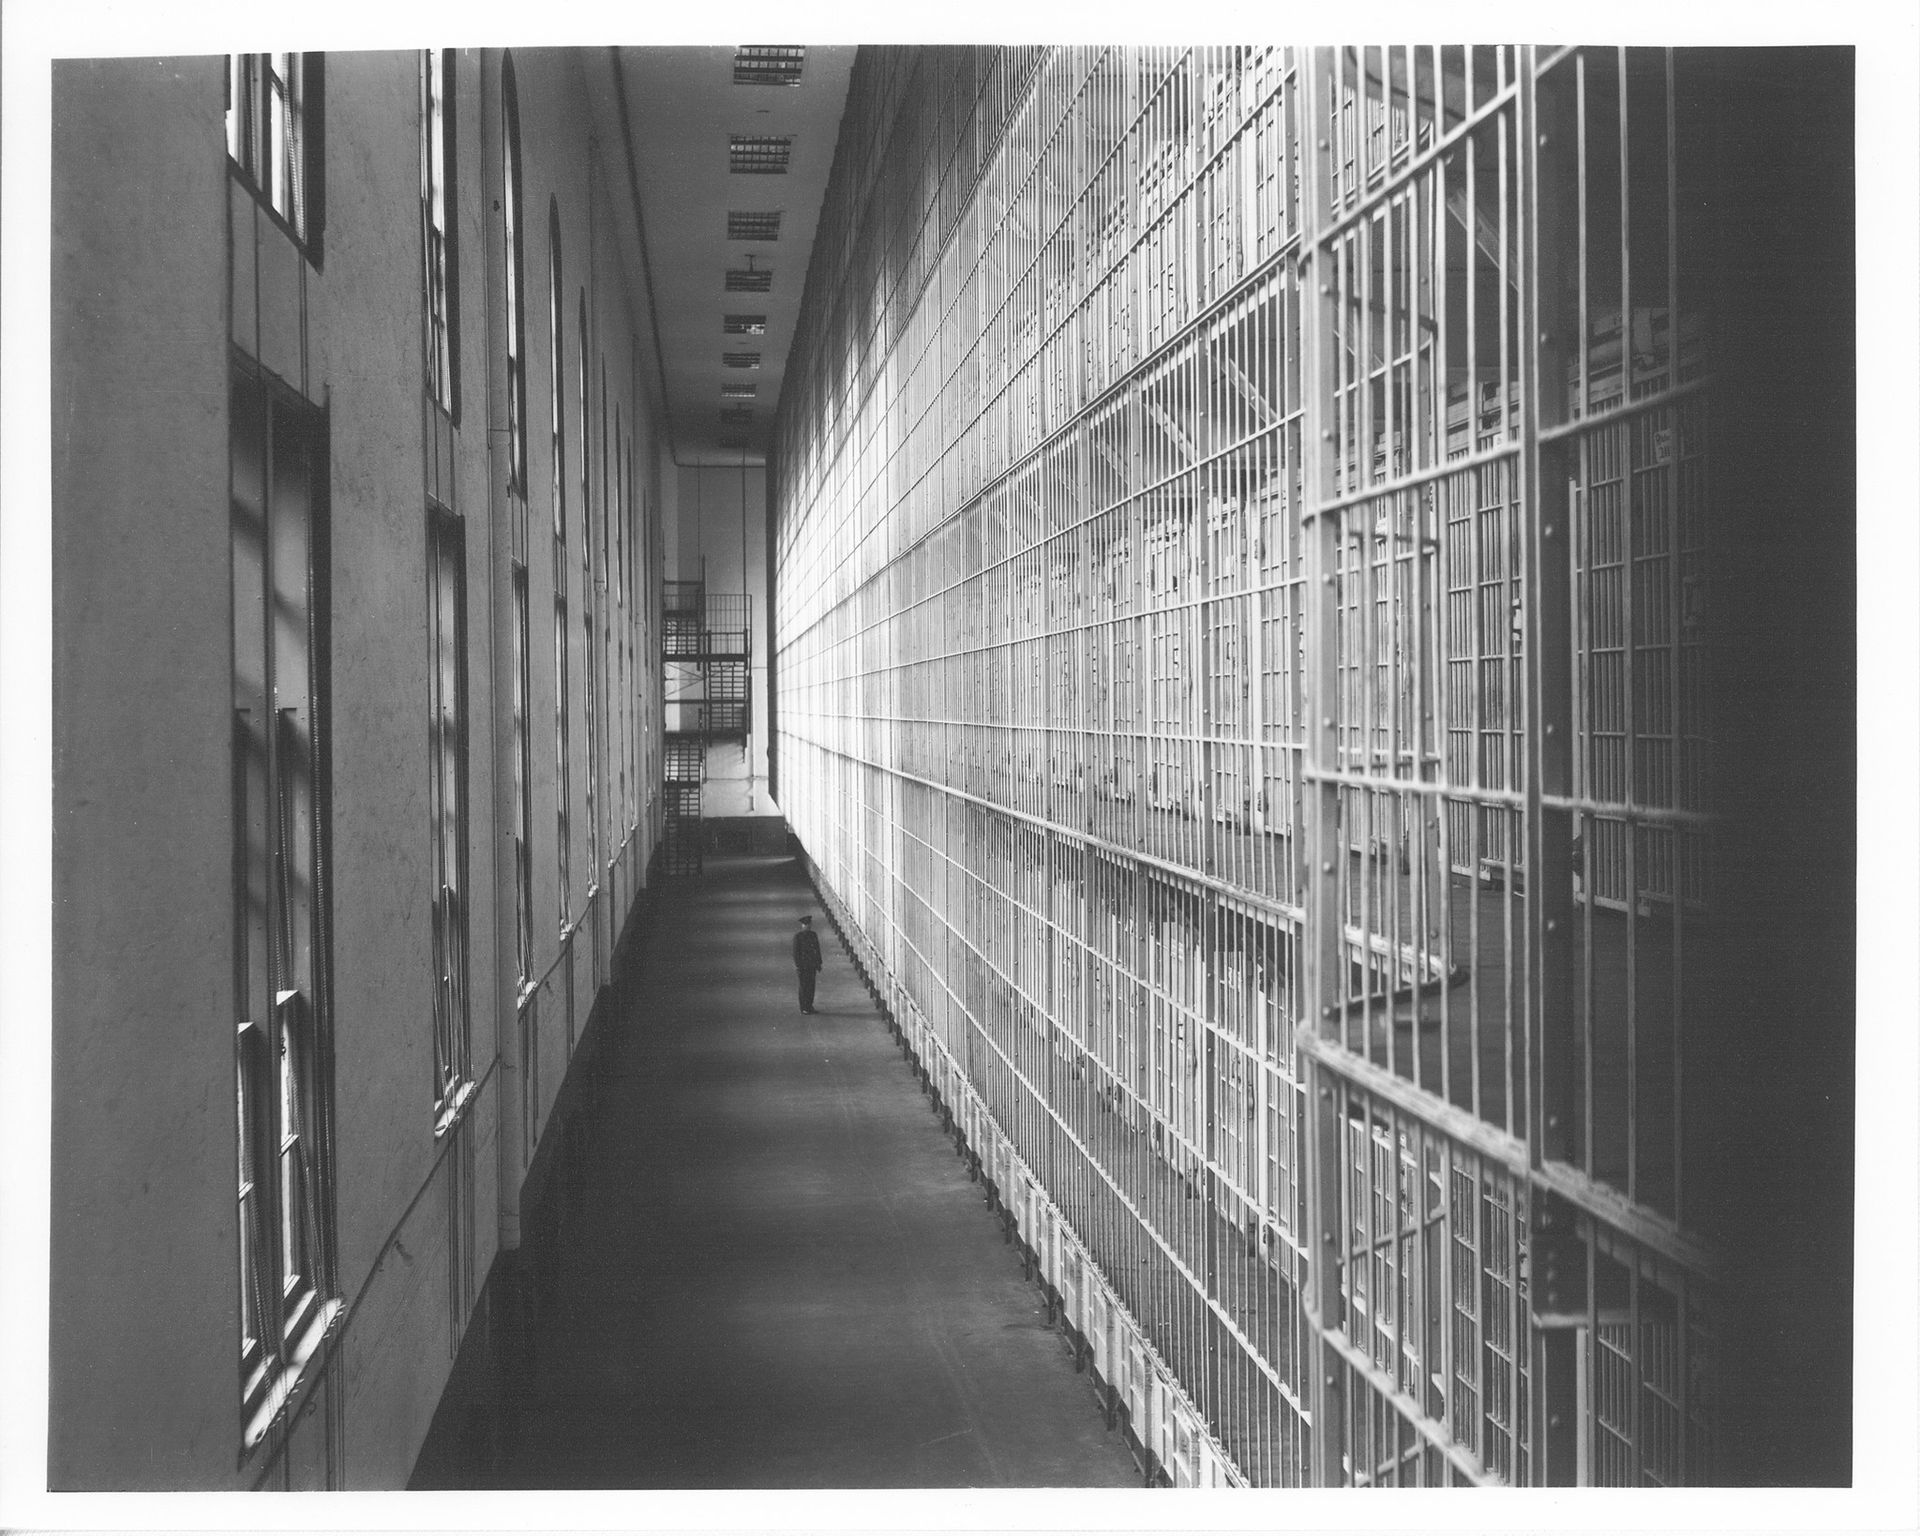 World's Largest Free Standing Jail Cell: world record in Mansfield, Ohio